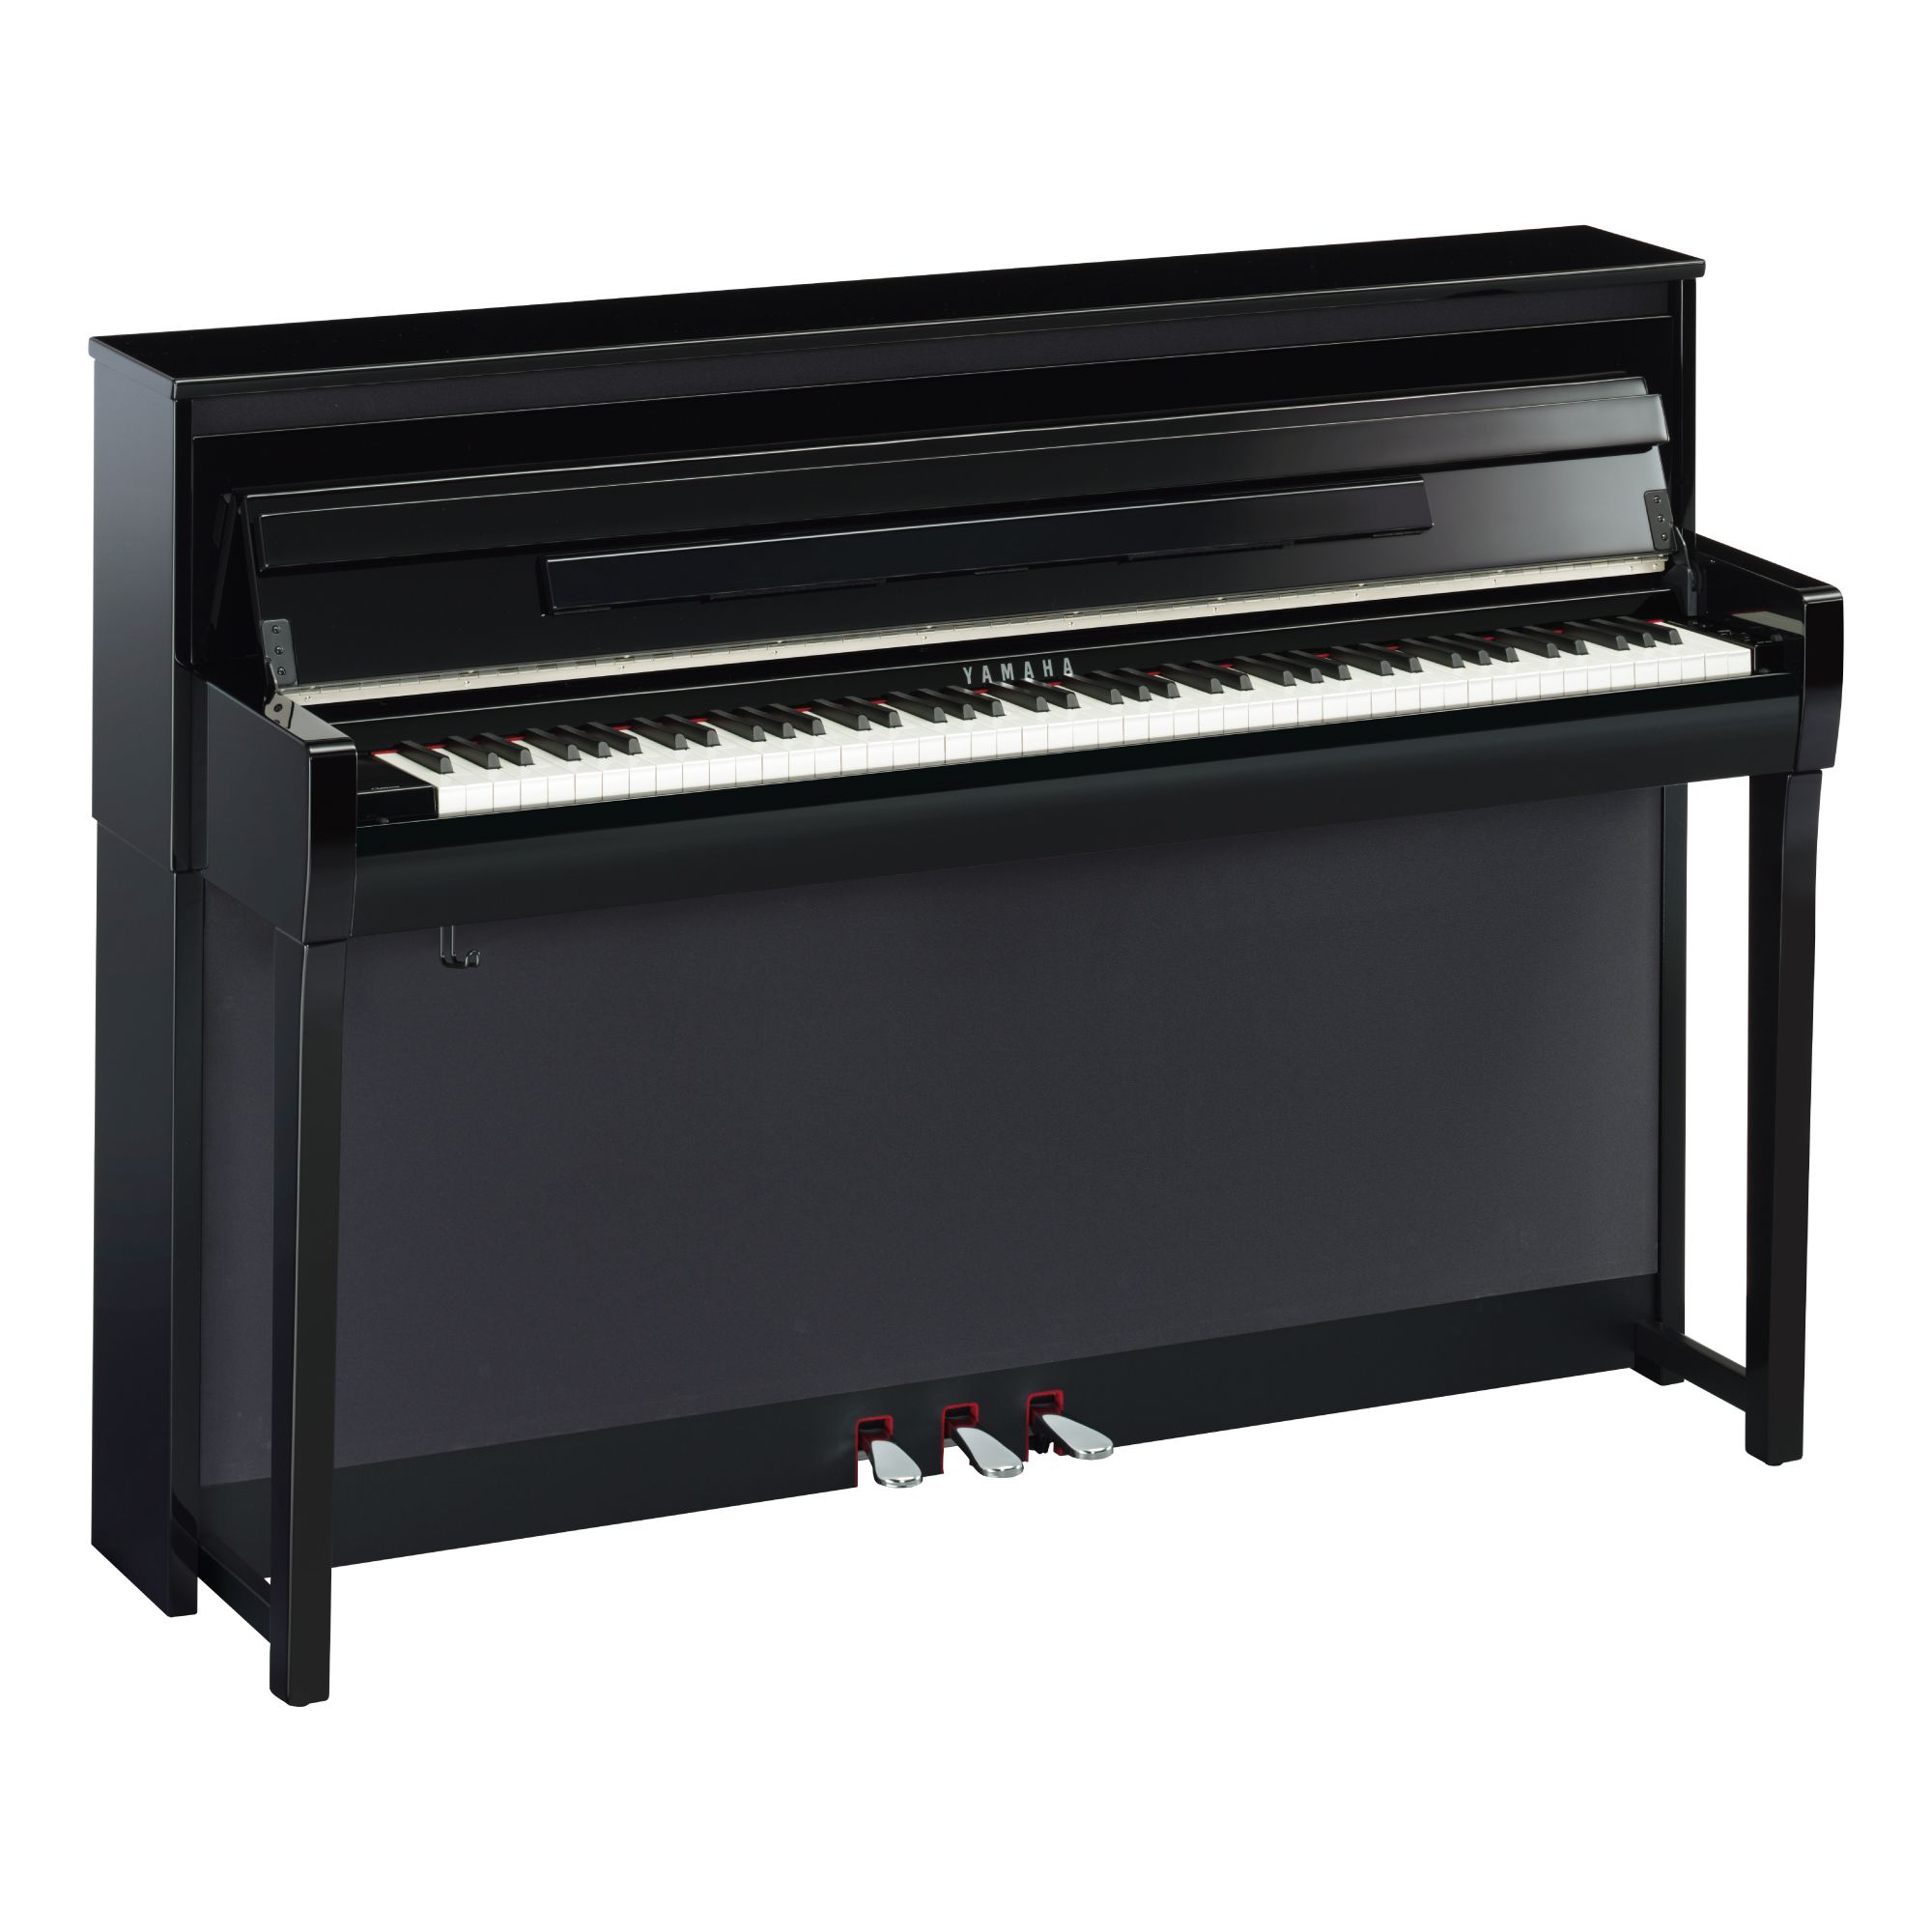 Yamaha Clp 785 Pe - Digital piano with stand - Variation 1